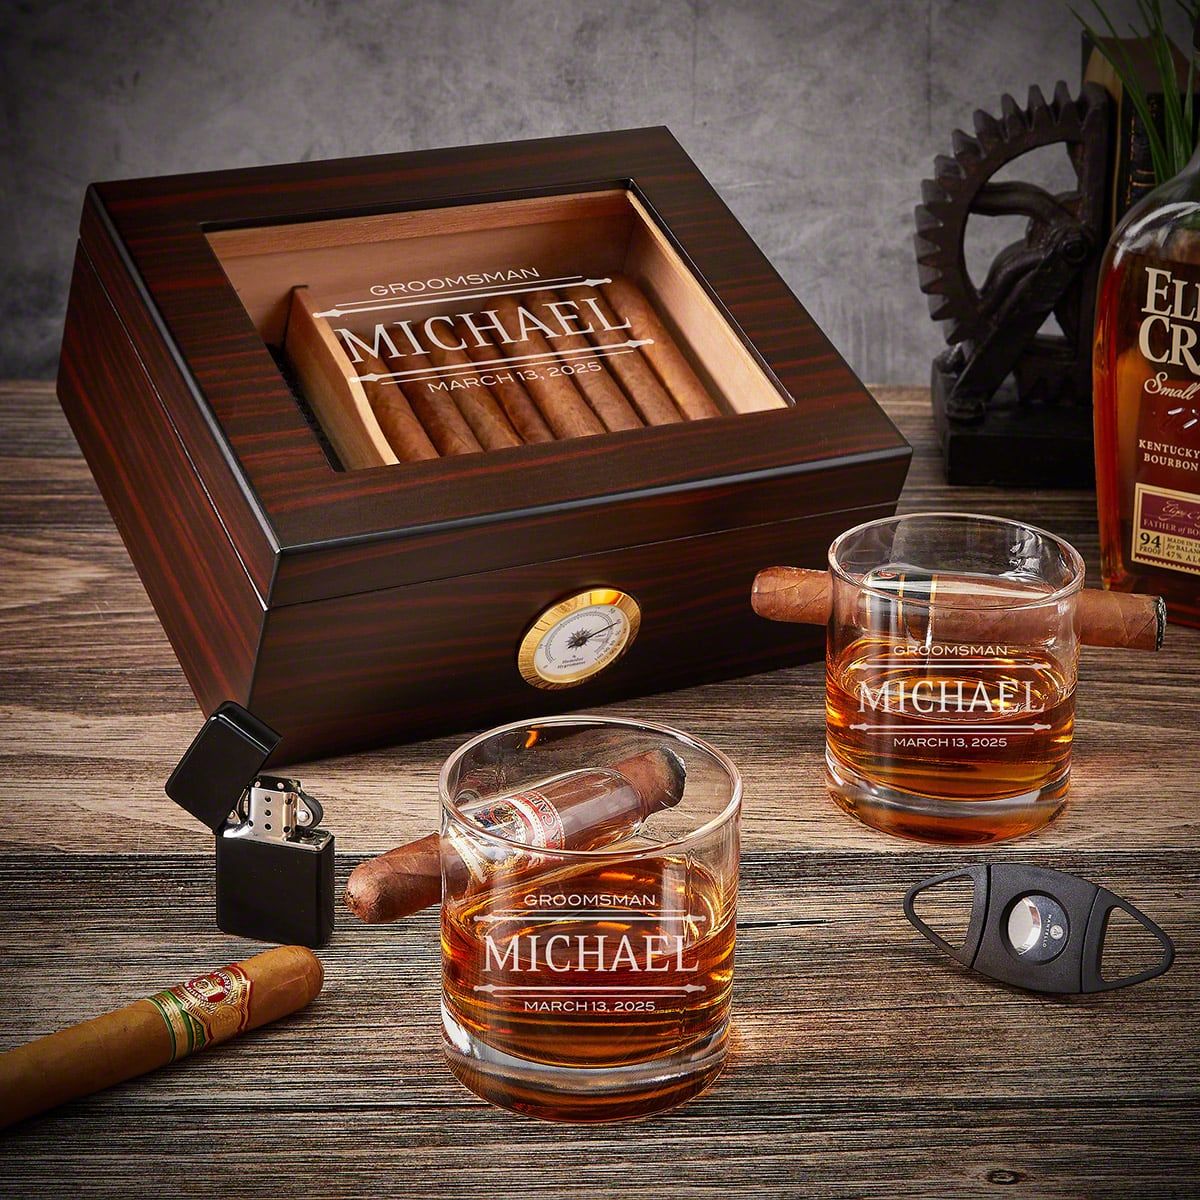 https://images.homewetbar.com/media/catalog/product/p/e/personalized-dark-humidor-round-cigar-glass-set-5pc-stanford-p-10789.jpg?store=default&image-type=image